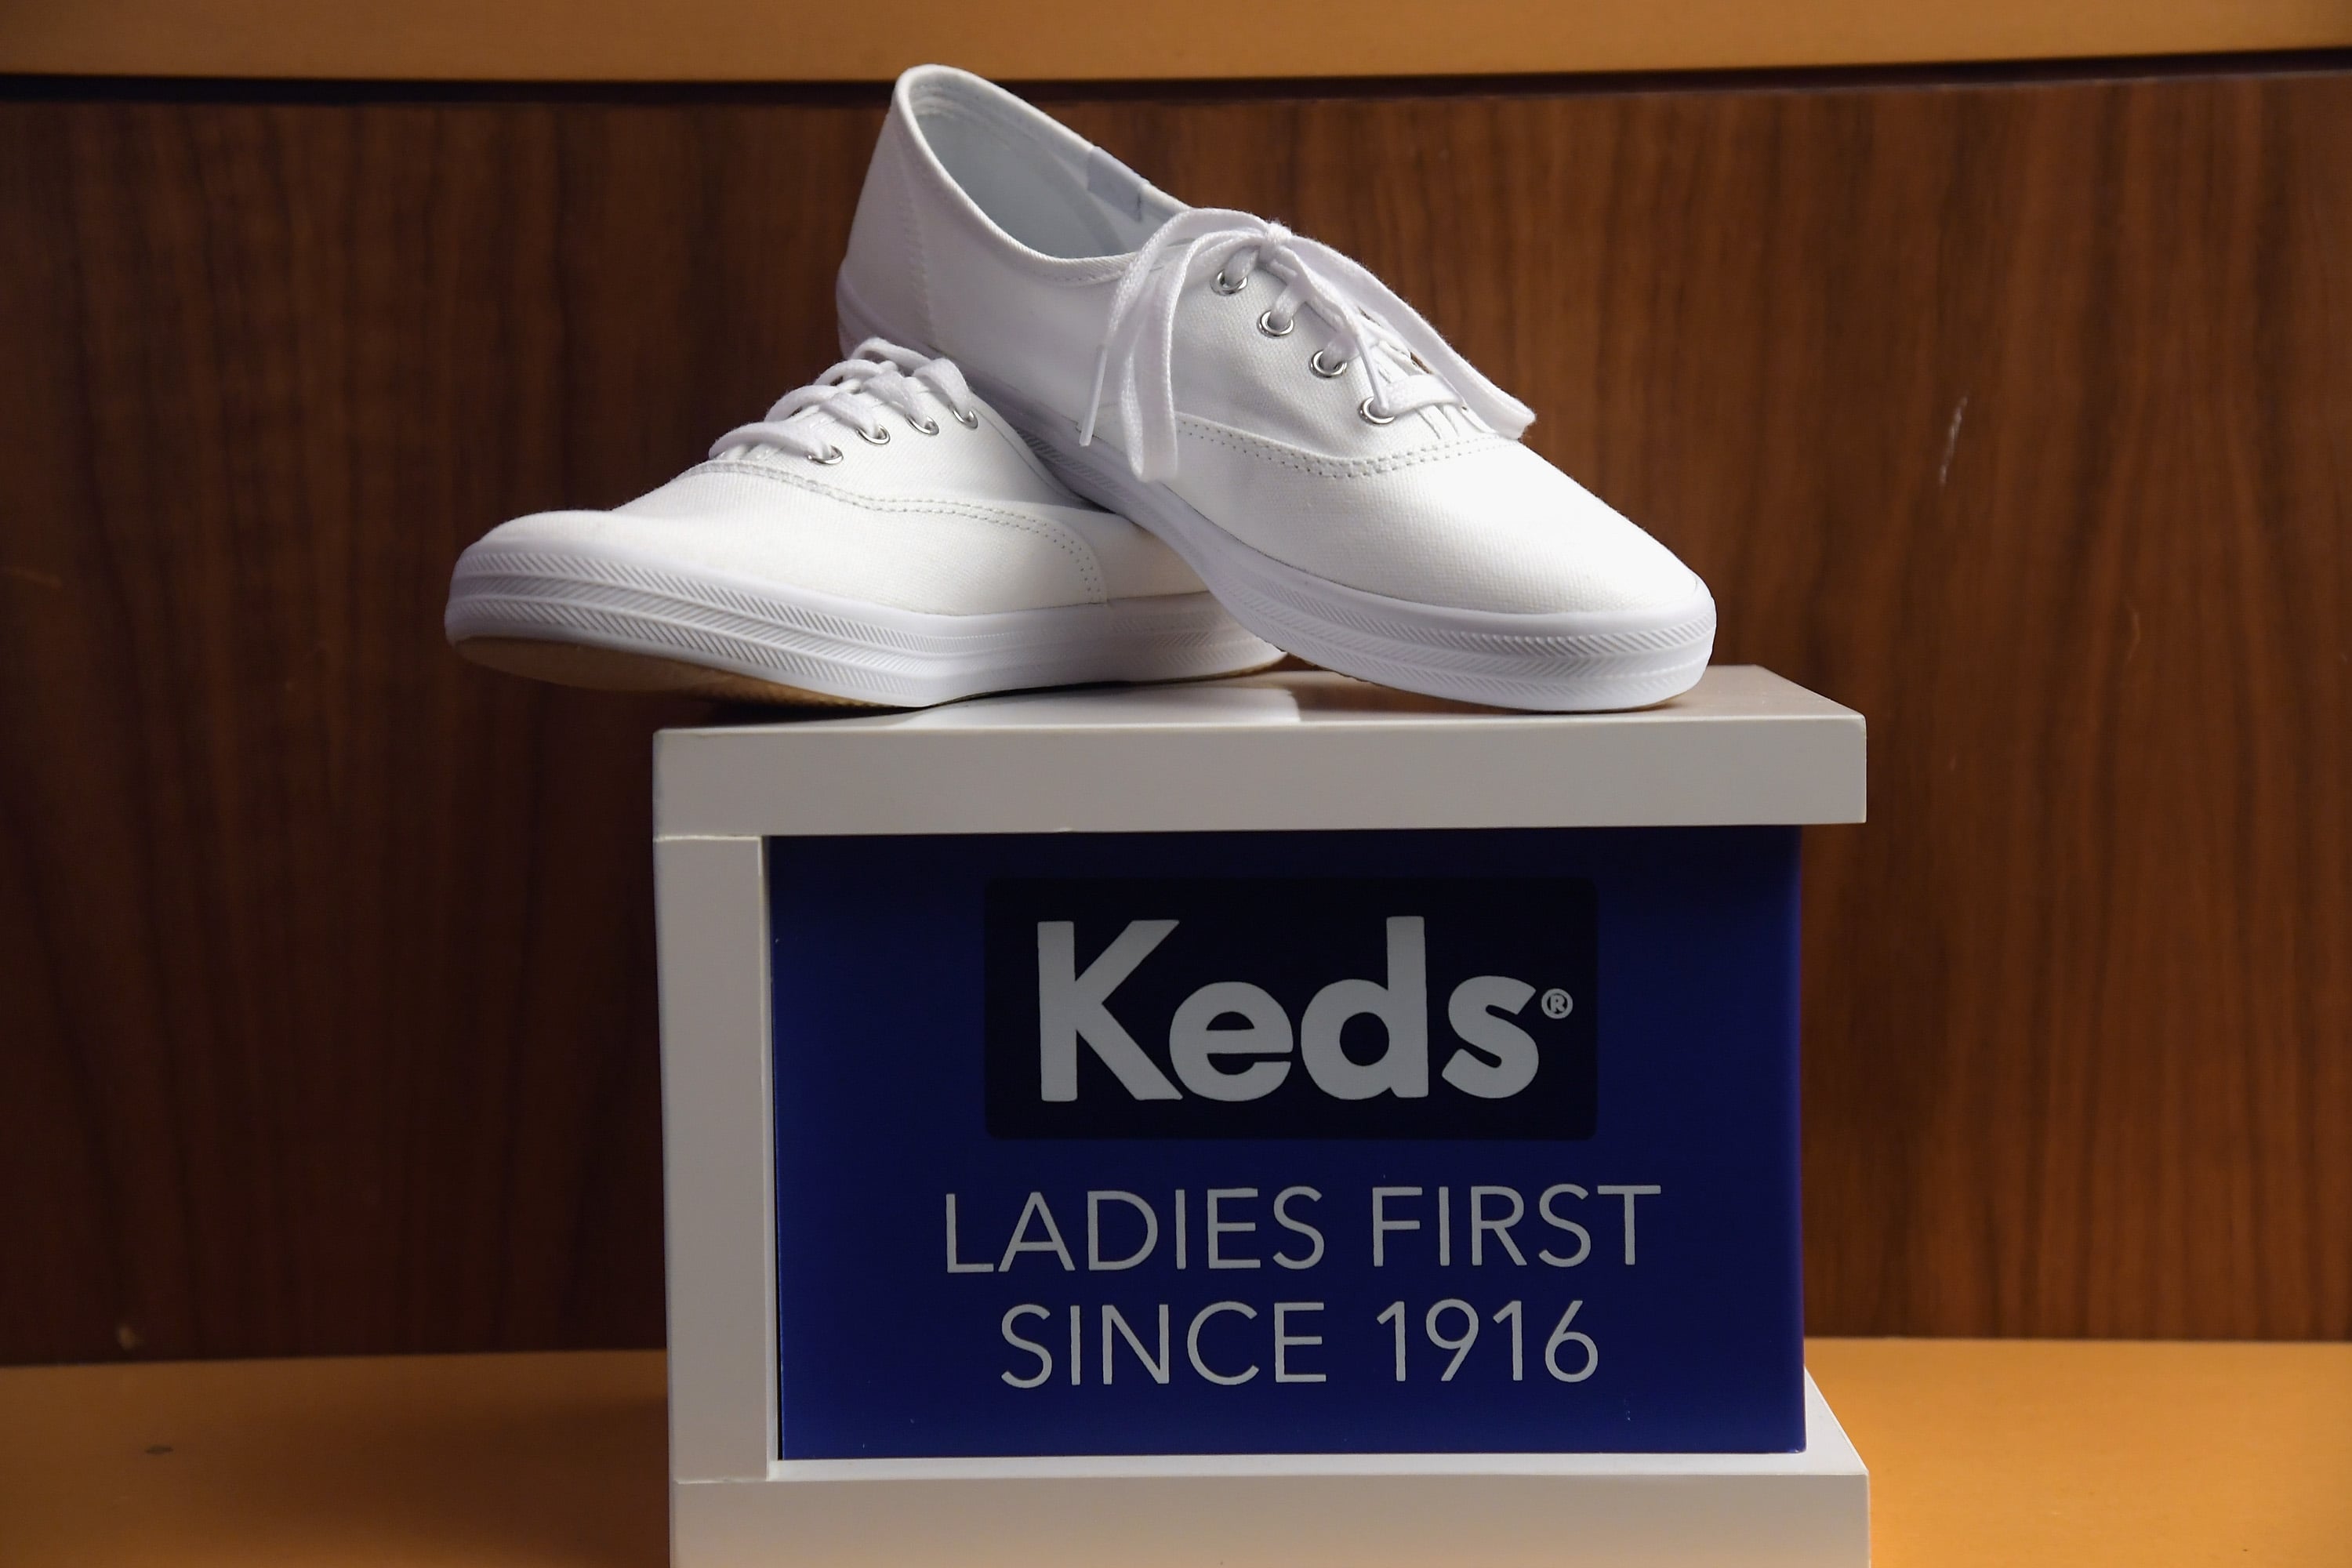 Shop Sneakers, Tennis & Canvas Shoes on sale for Women's & Kids', Keds